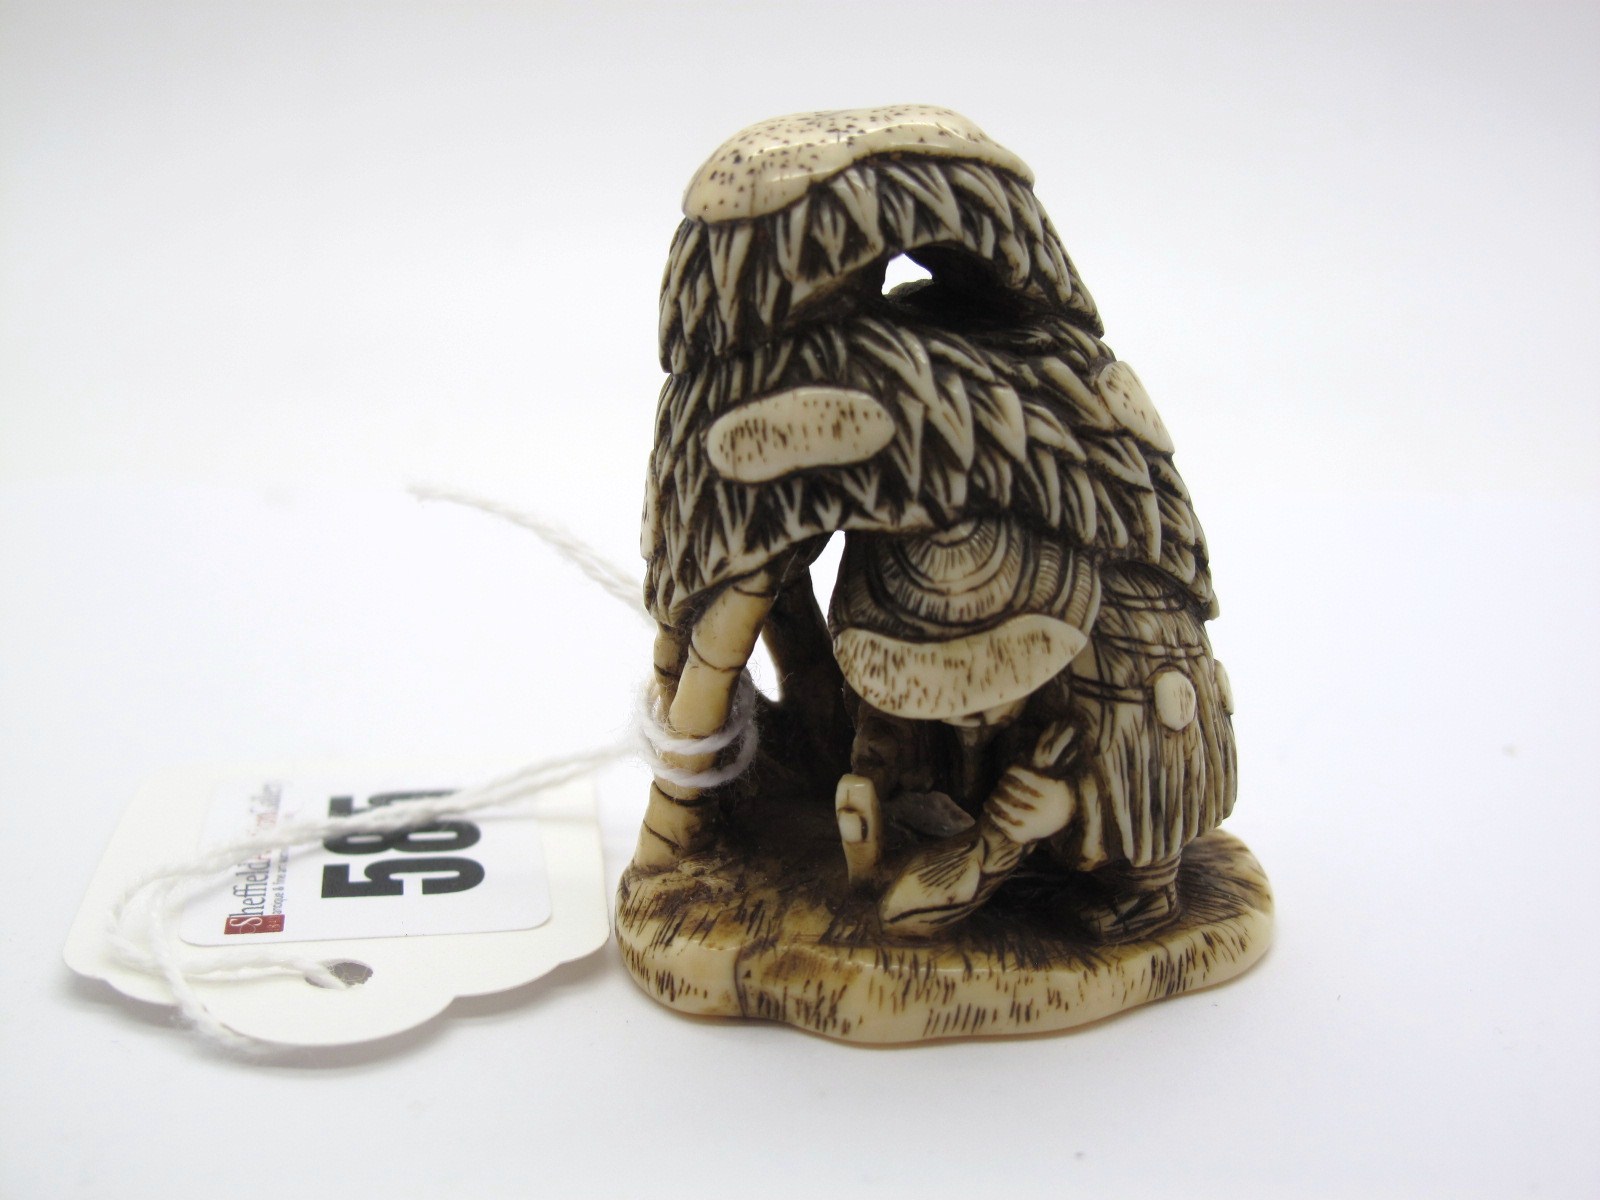 A XIX Century Japanese Ivory Netsuke, carved as a woodcutter working beneath a canopy of trees, 5.